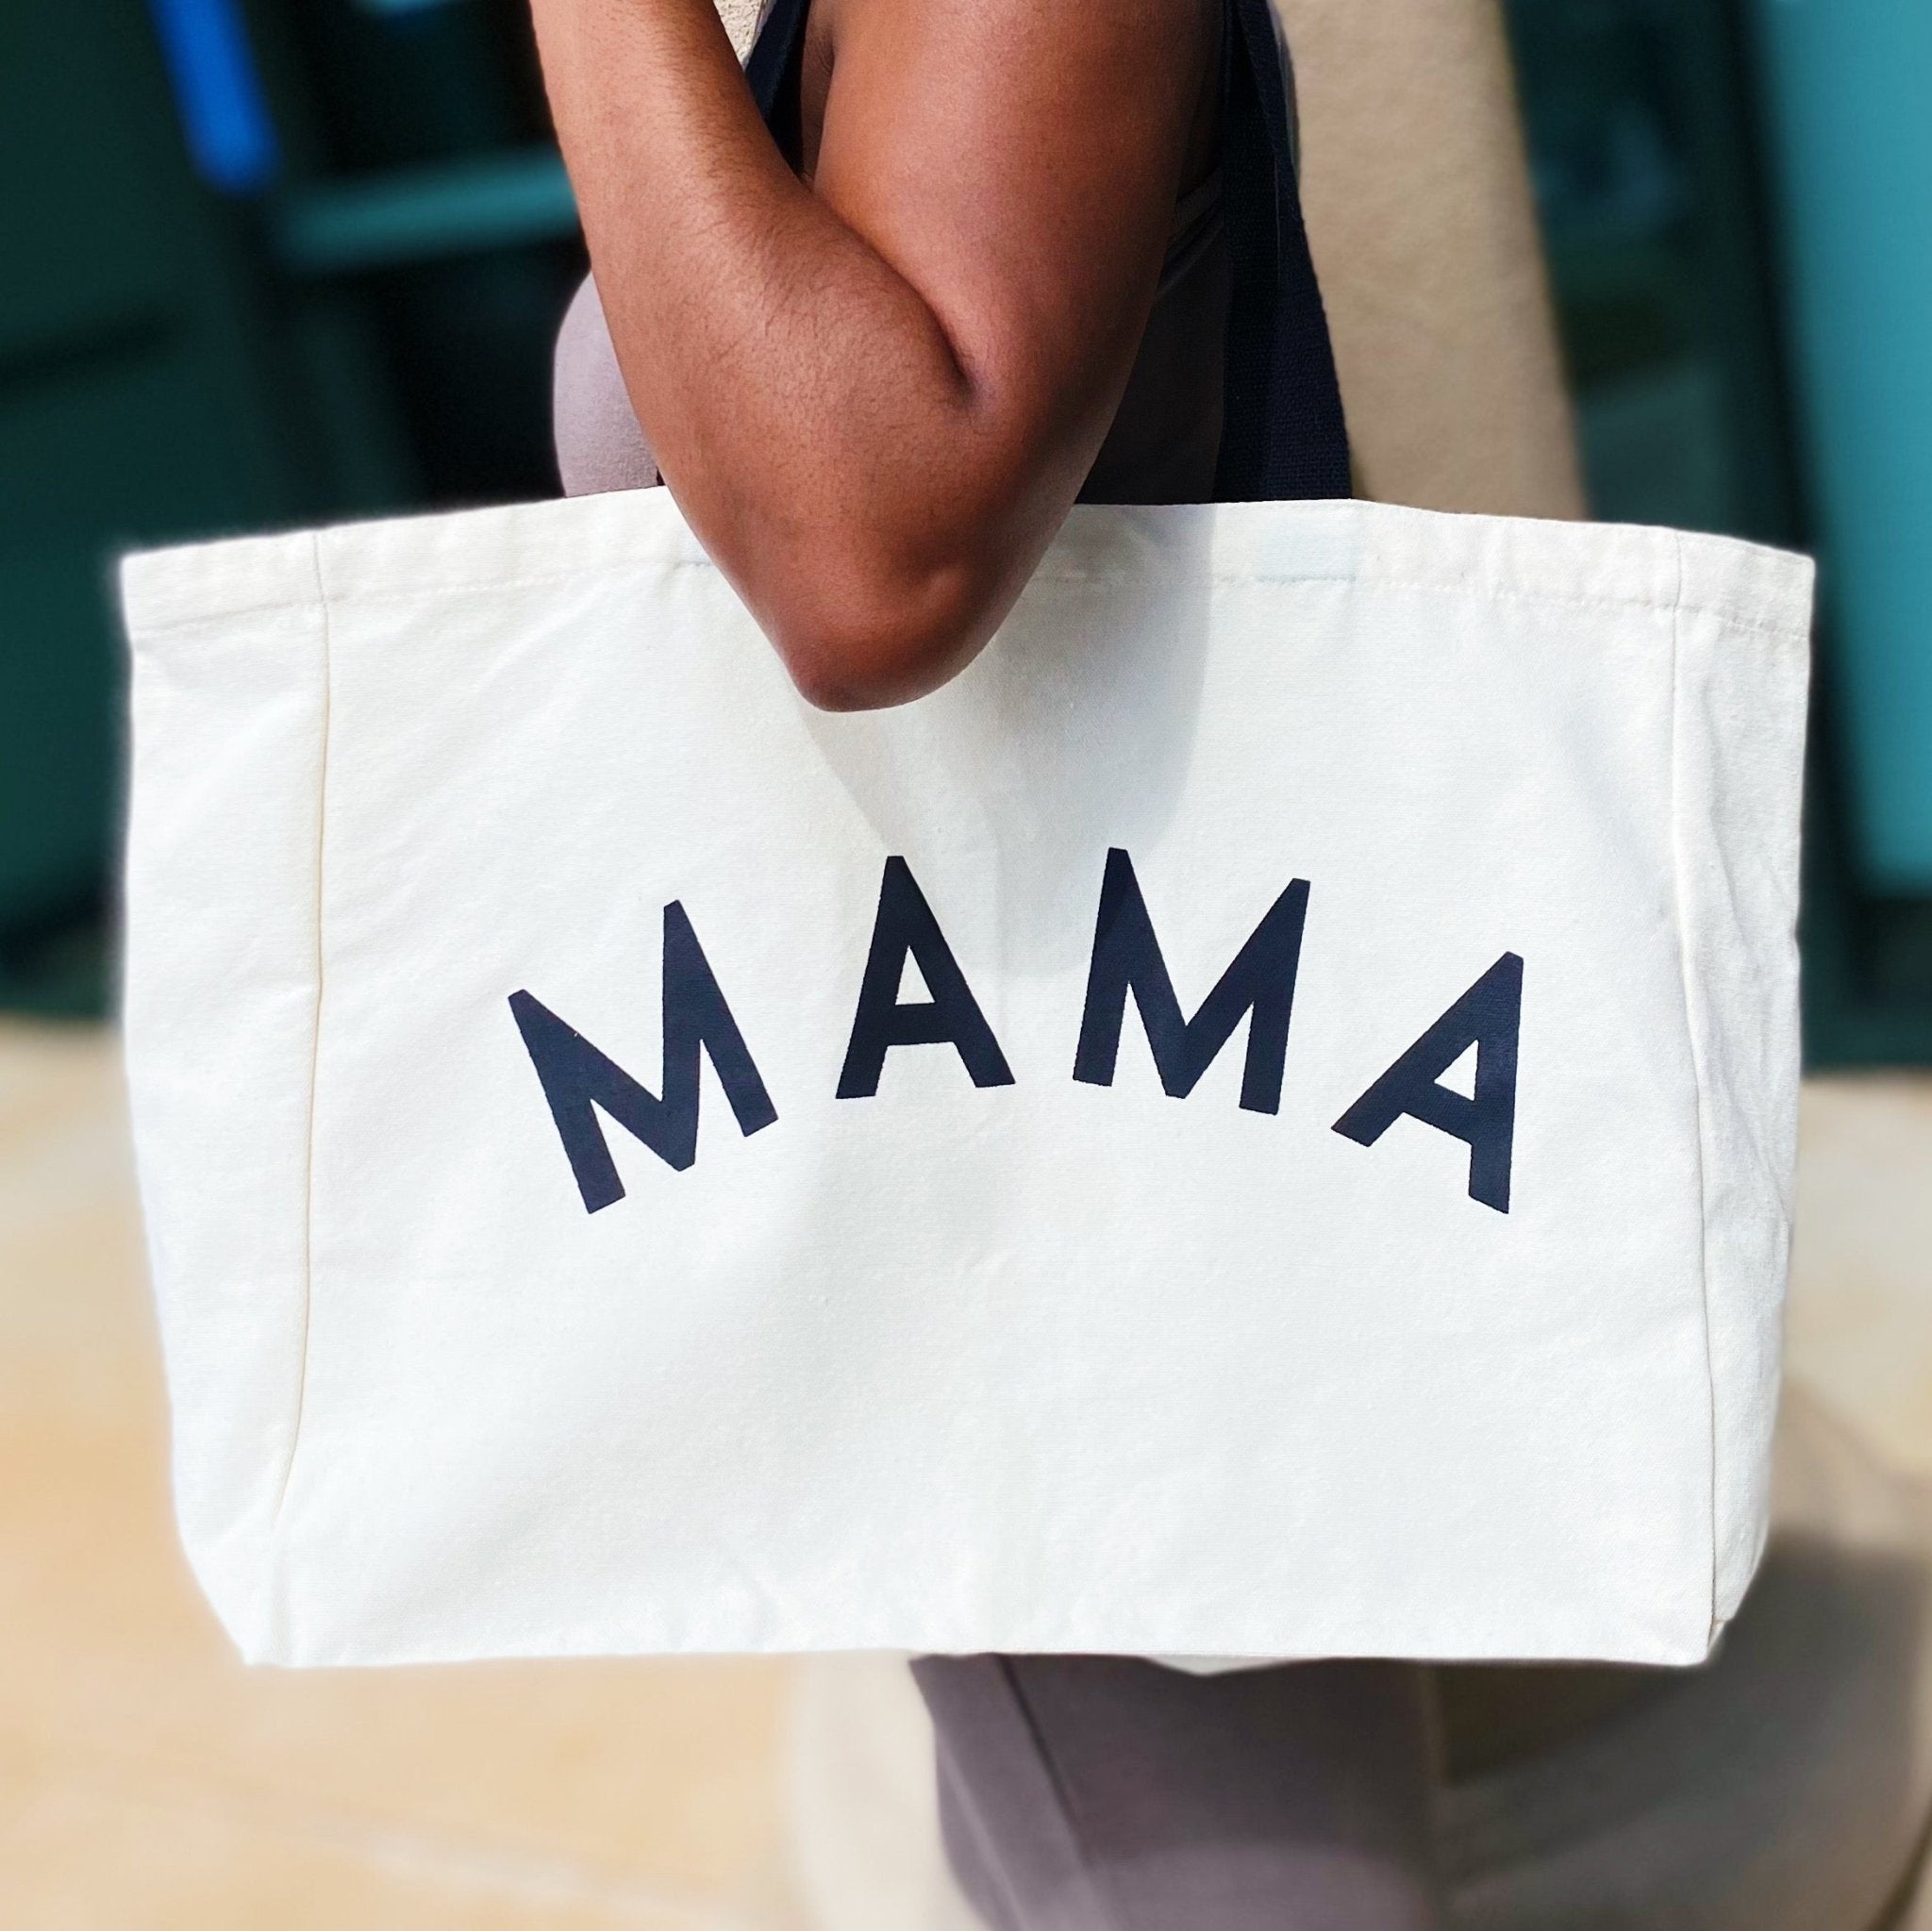 Mama Canvas Tote - The Kindness Cause